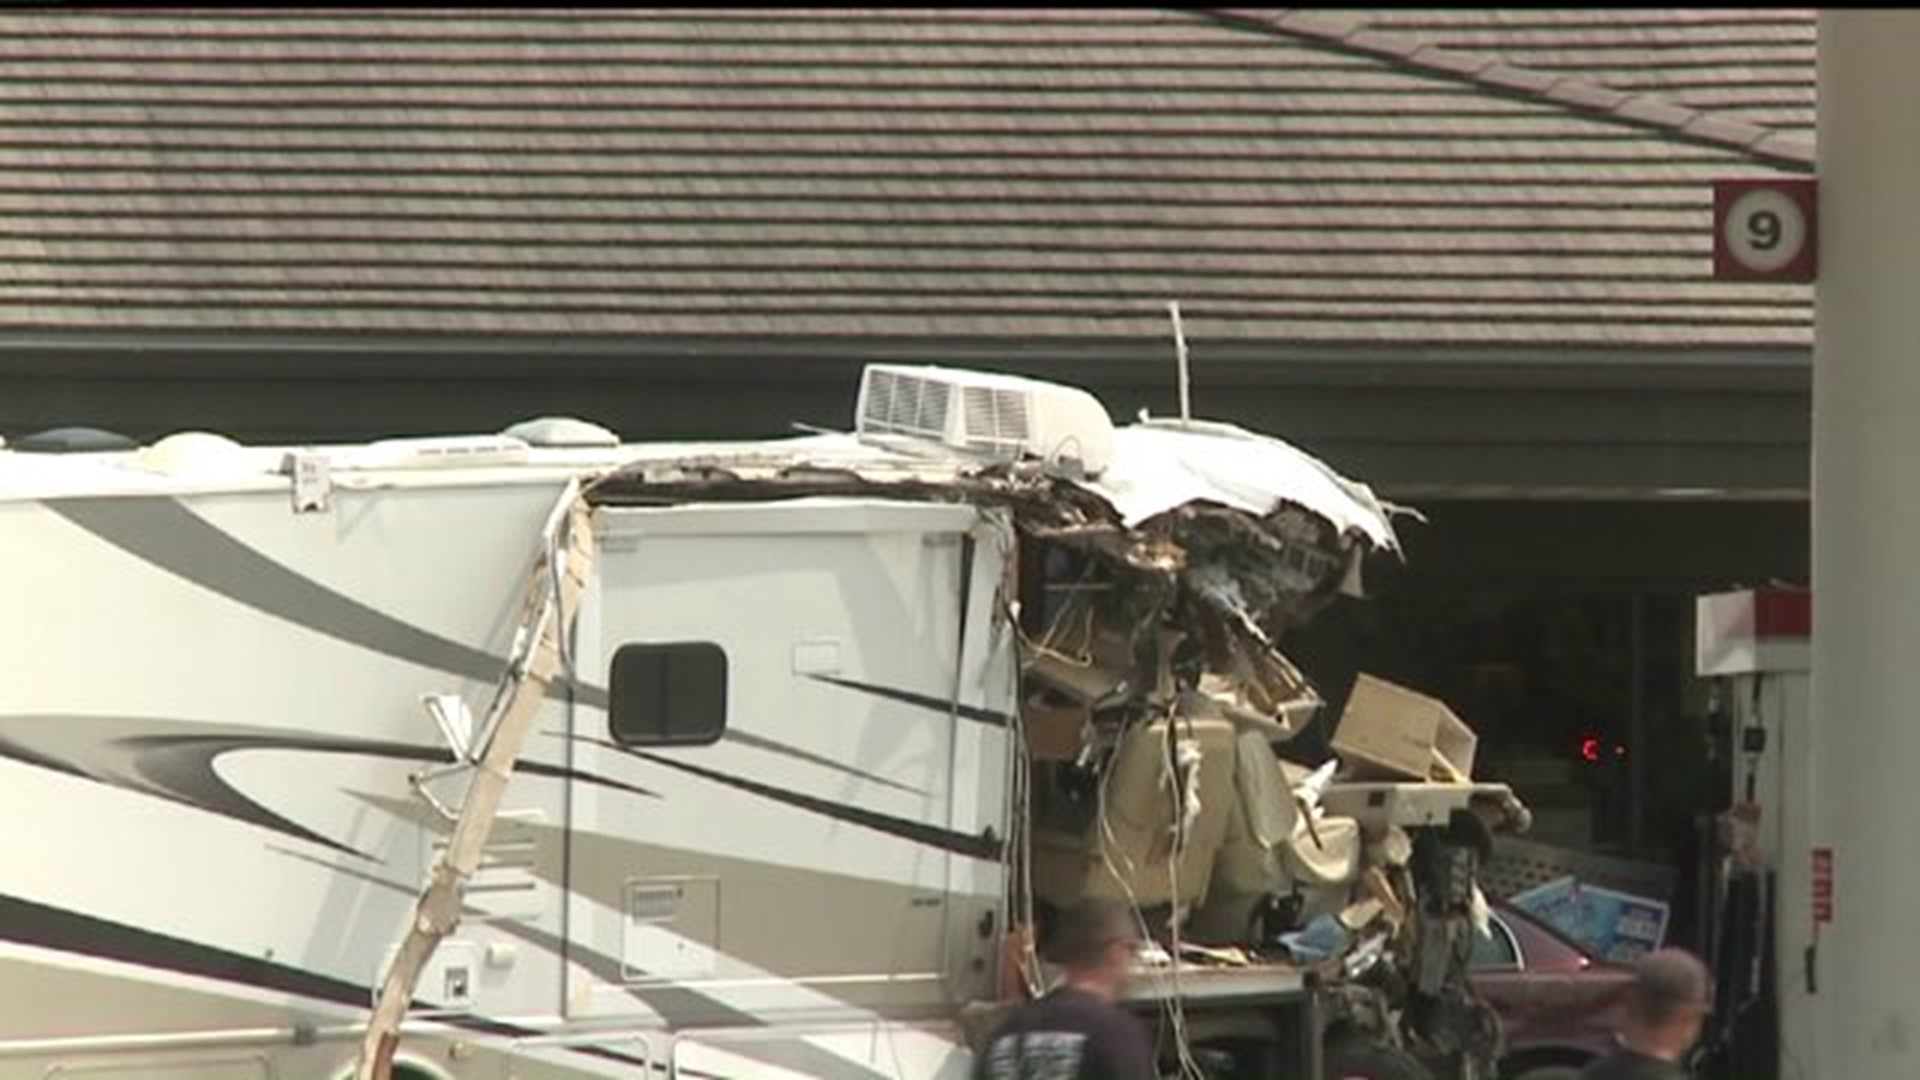 Victim Identified in Deadly RV Accident